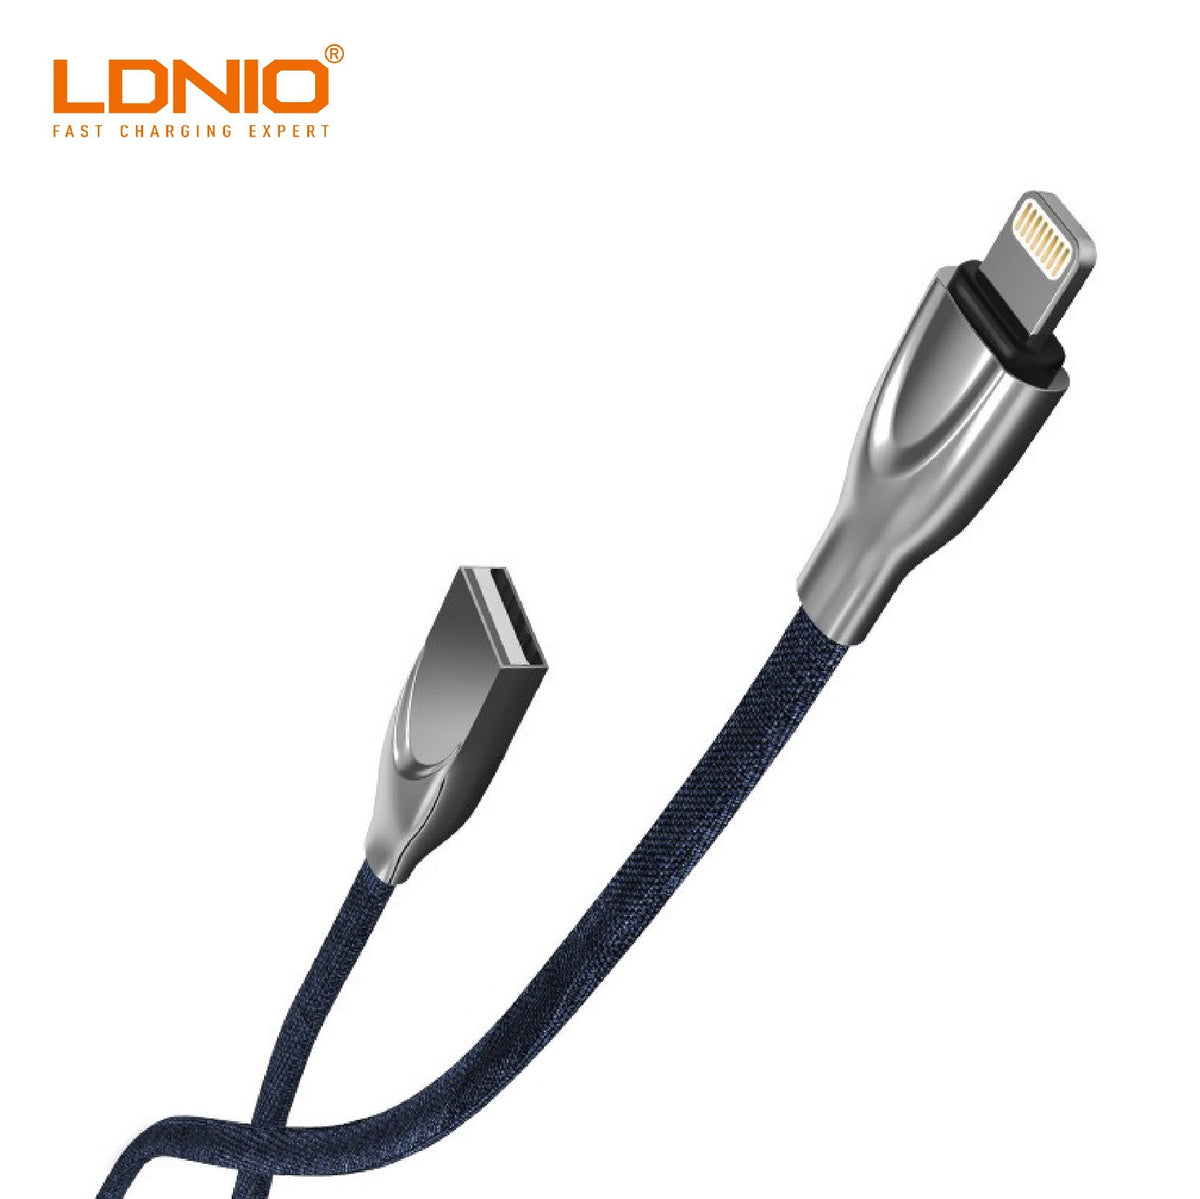 LDNIO LS29  Lightning Cable  Fast Charging and Data Transfer Denim Design Cable (2.4A/1m) 4.9